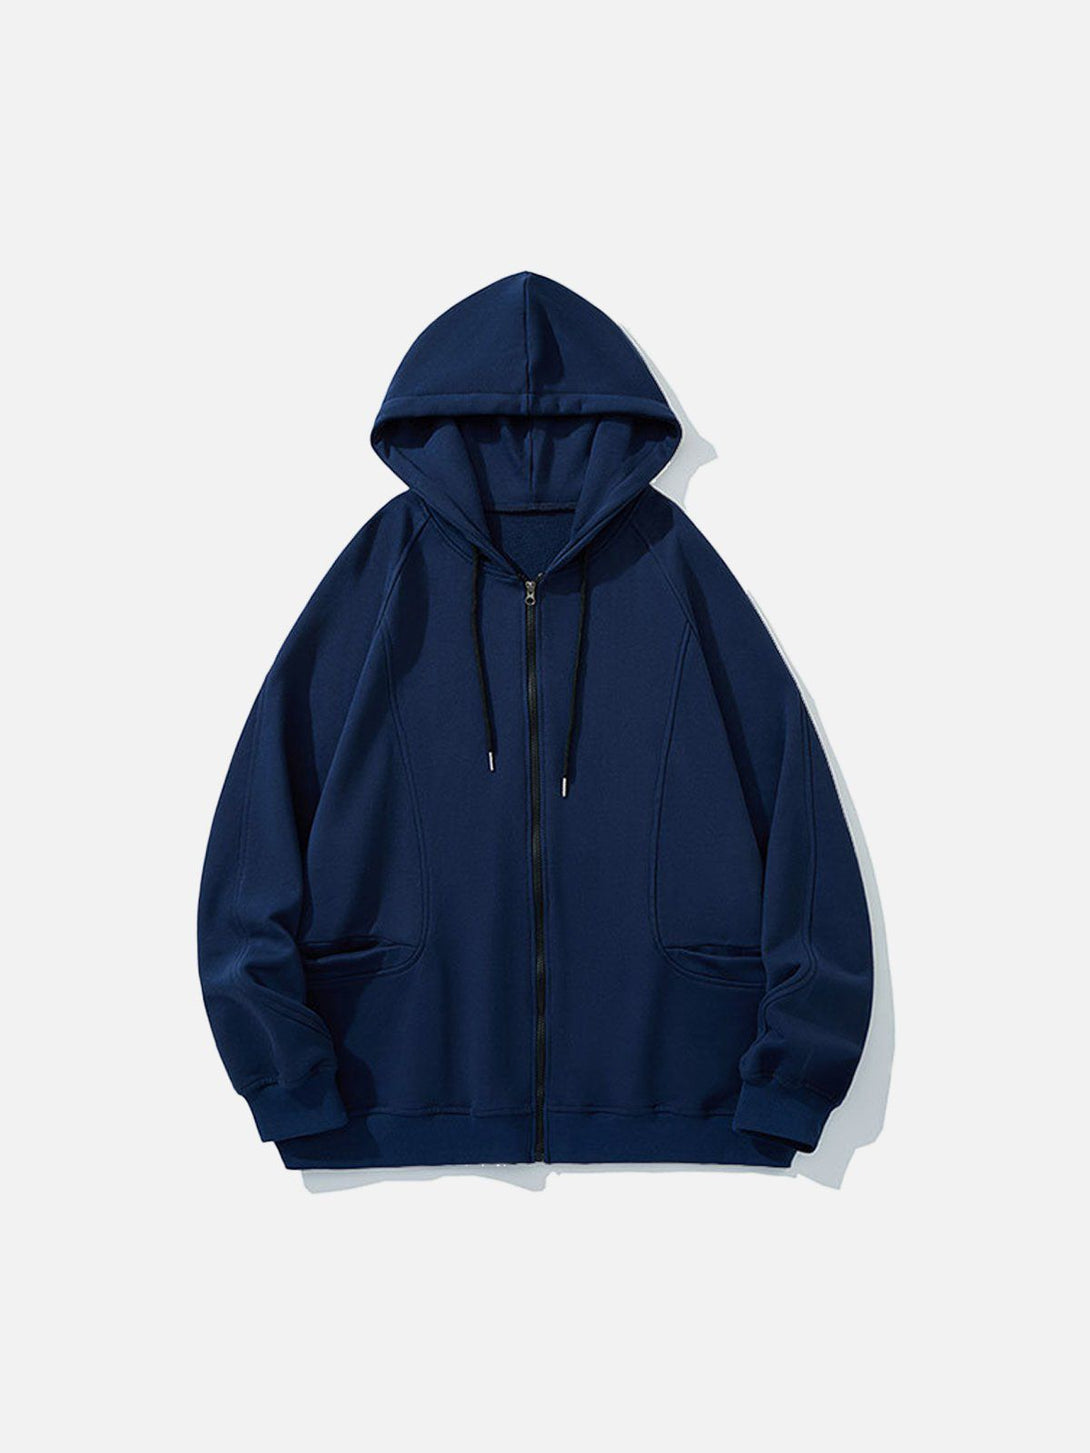 Levefly - Solid Color Zipped Hoodie - Streetwear Fashion - levefly.com